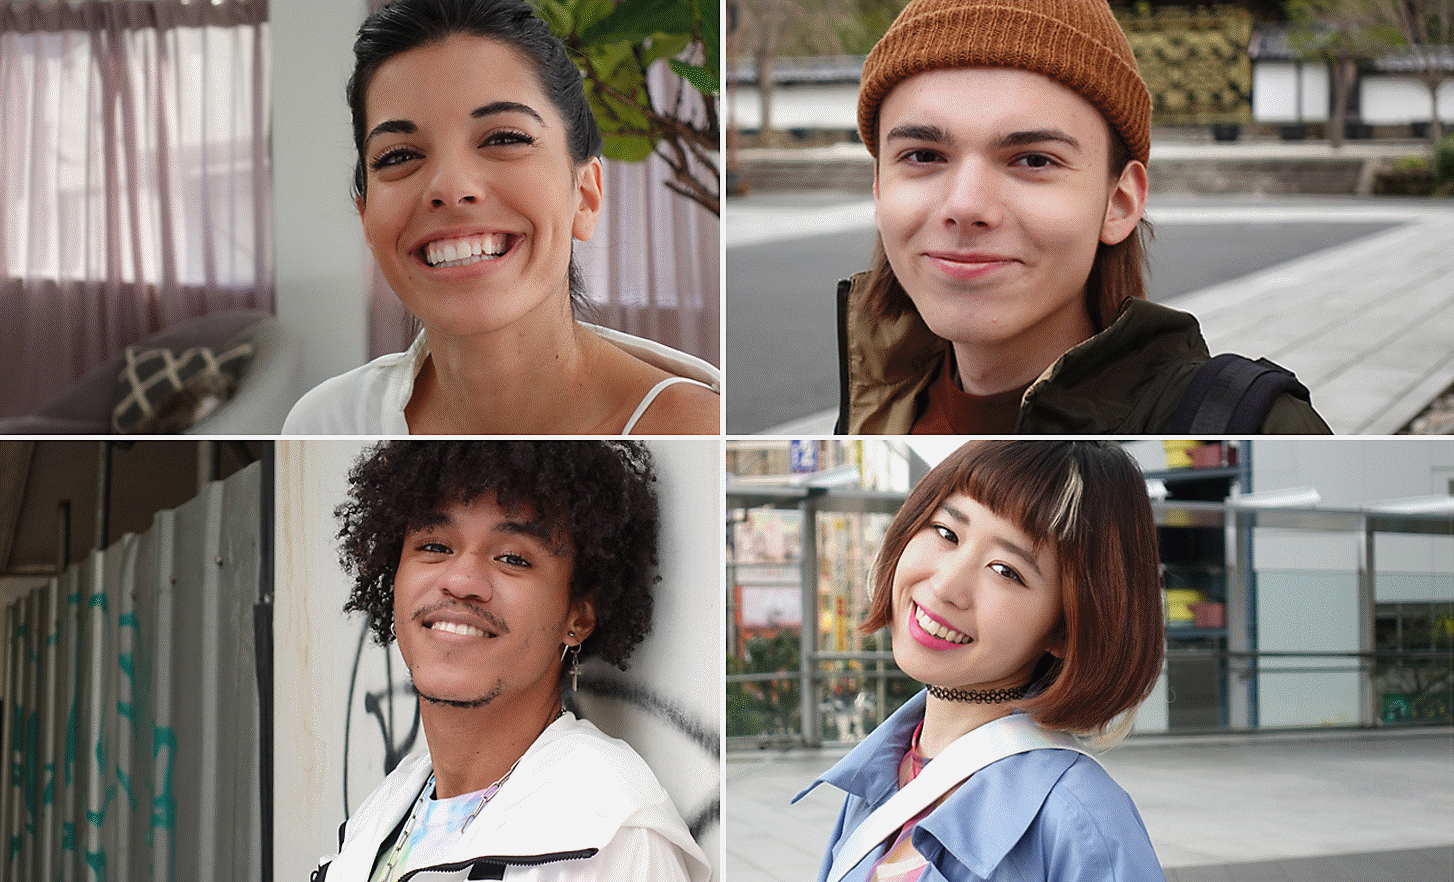 Portraits of four smiling people